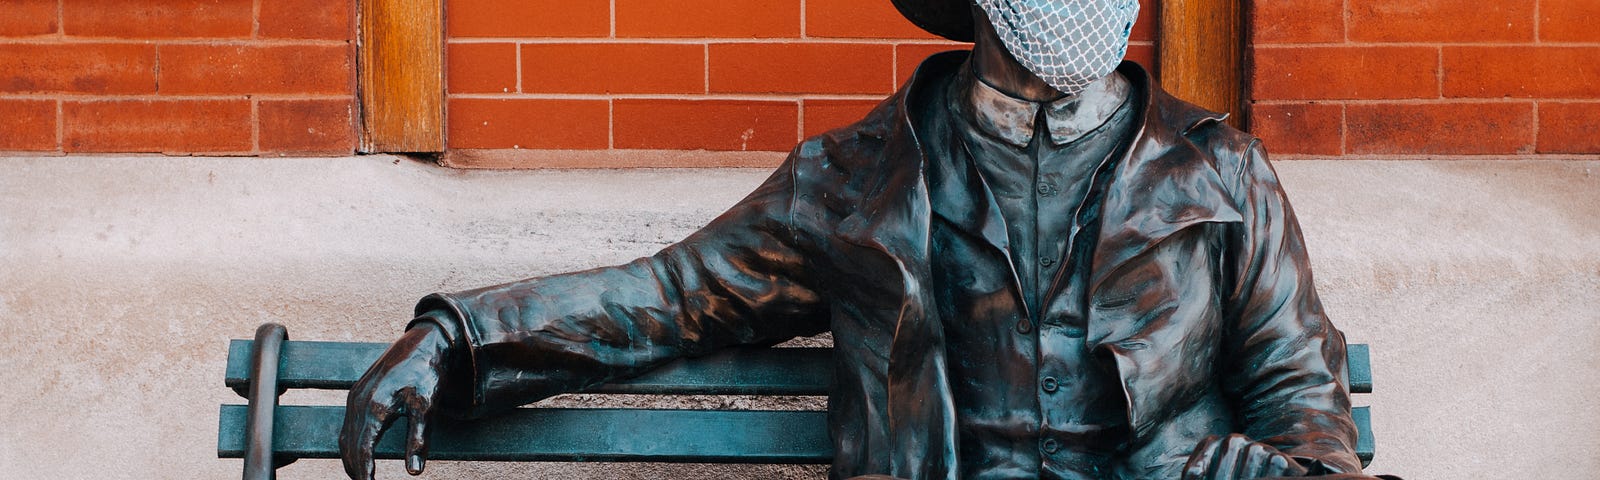 Statue of a fireman on a bench wearing a facial mask